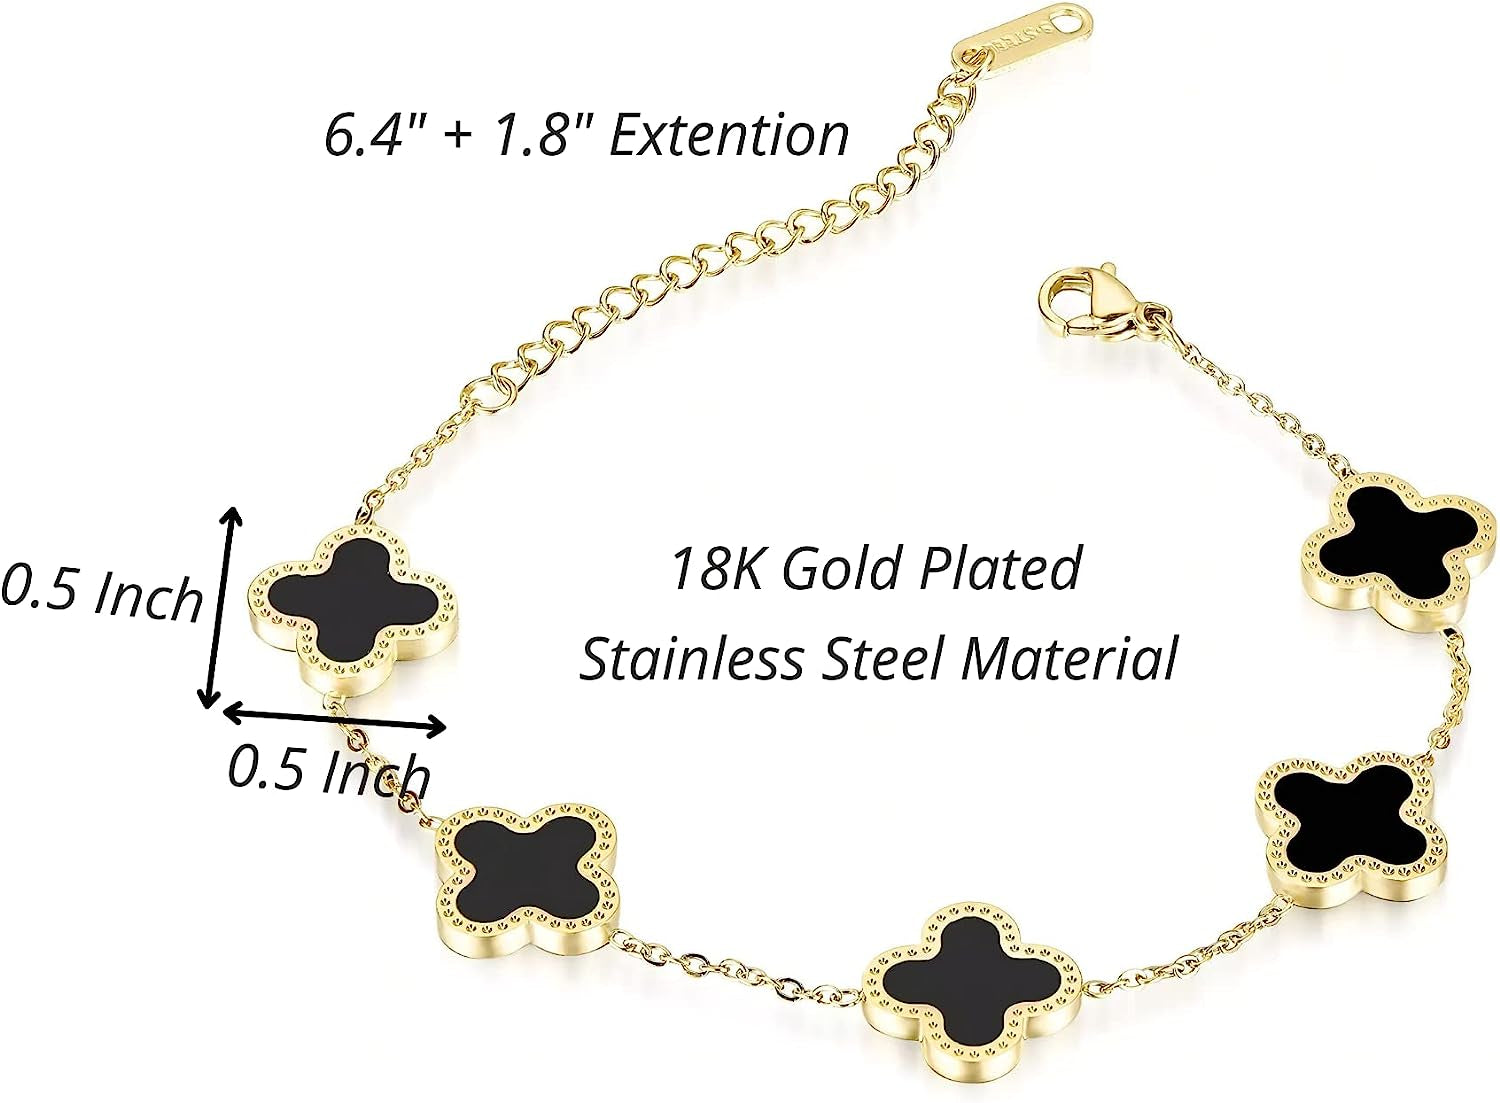 Four Leaf Clover Bracelet for Women 18K Gold Plated Stainless Steel Lucky 4 Leaf Link Bracelet Wrist Jewelry for Mother and Daughter (Black Gold)